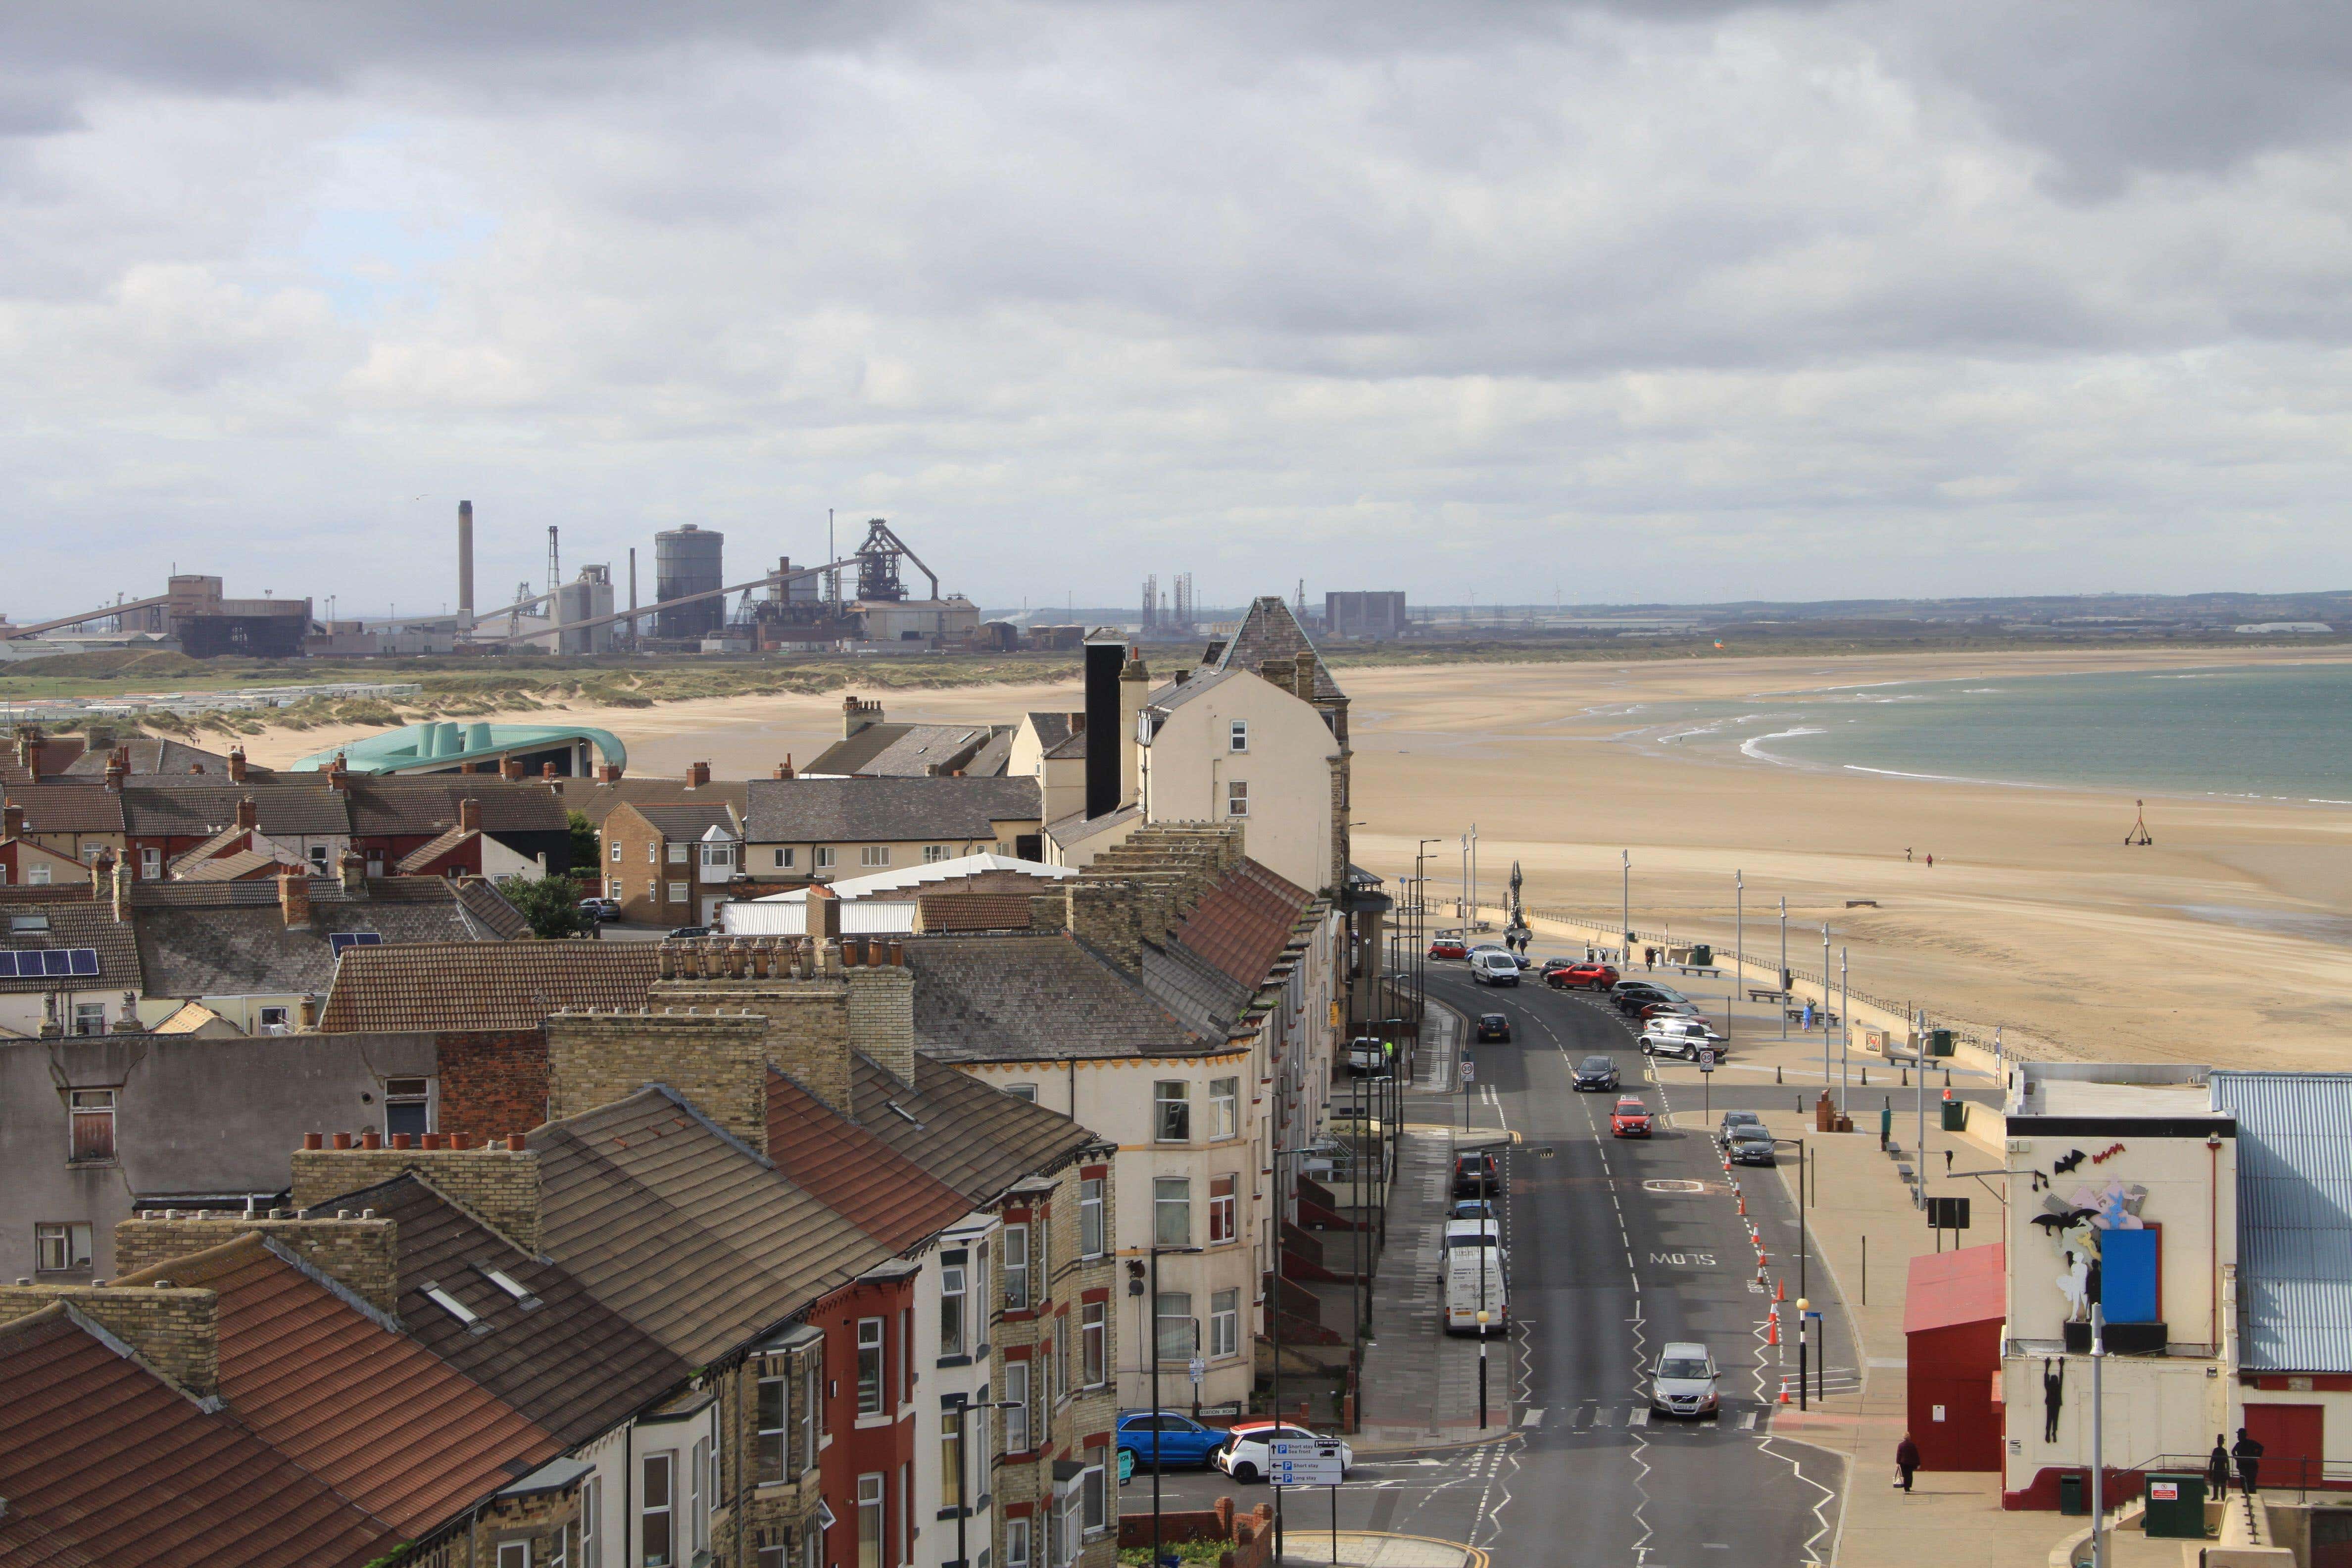 Redcar is the only candidate left to host a trial of hydrogen home heating, but locals want a vote on the proposal first